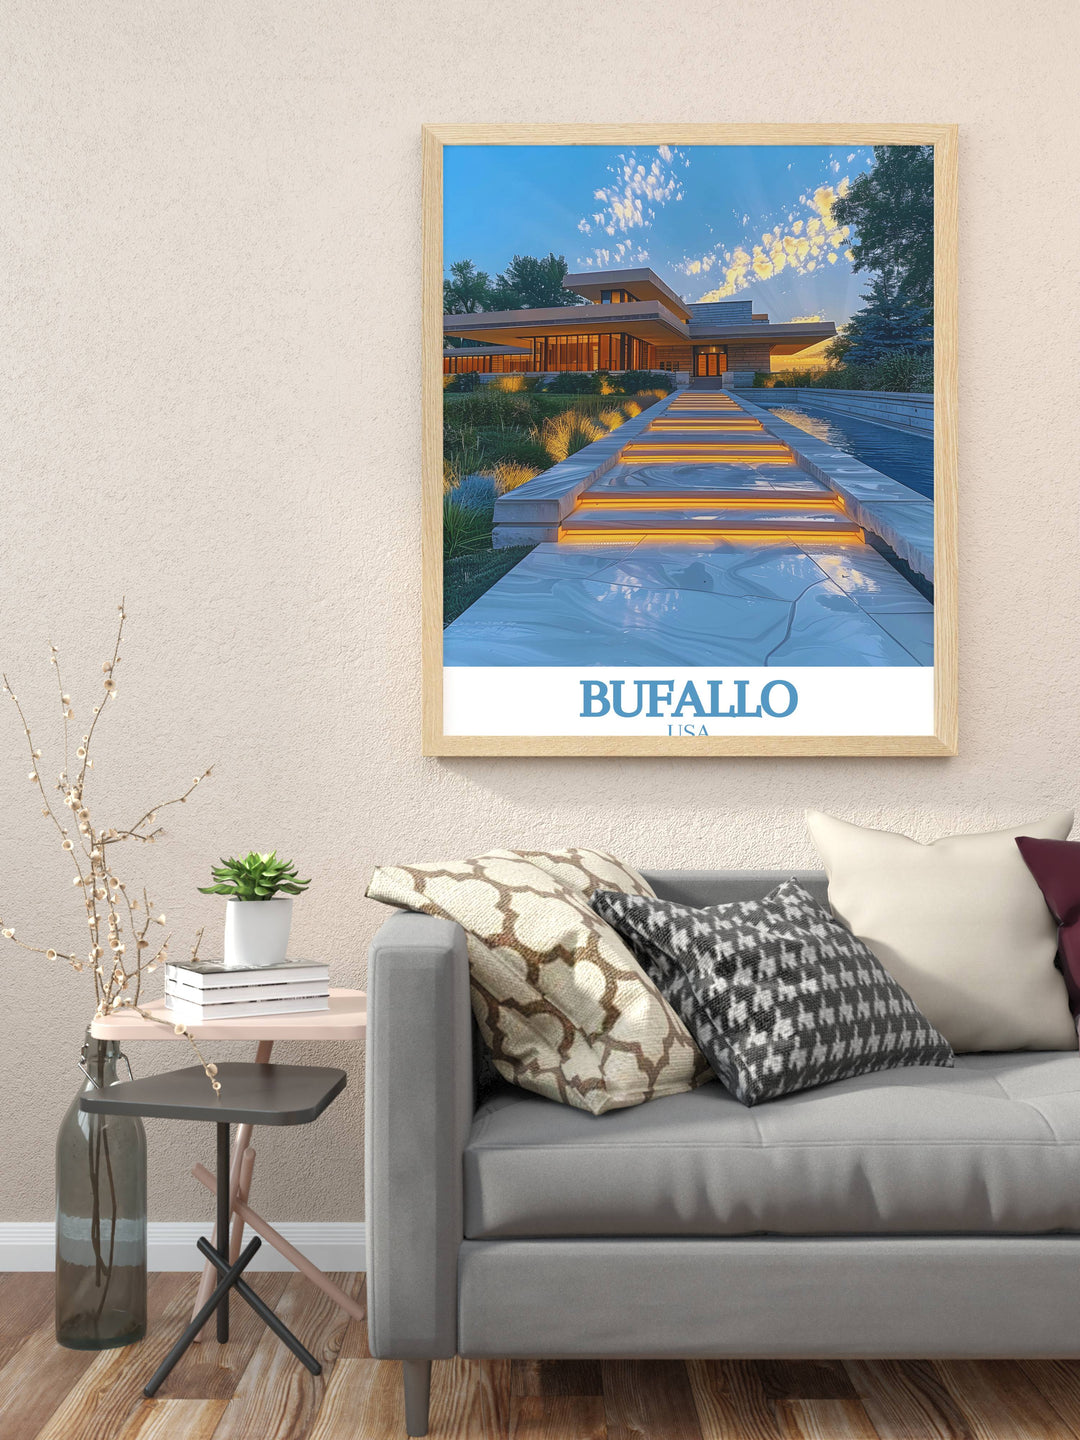 Frank Lloyd Wrights Darwin D Martin House prints offering a beautiful addition to home decor or office space these prints celebrate Buffalos architectural heritage and make thoughtful personalized gifts